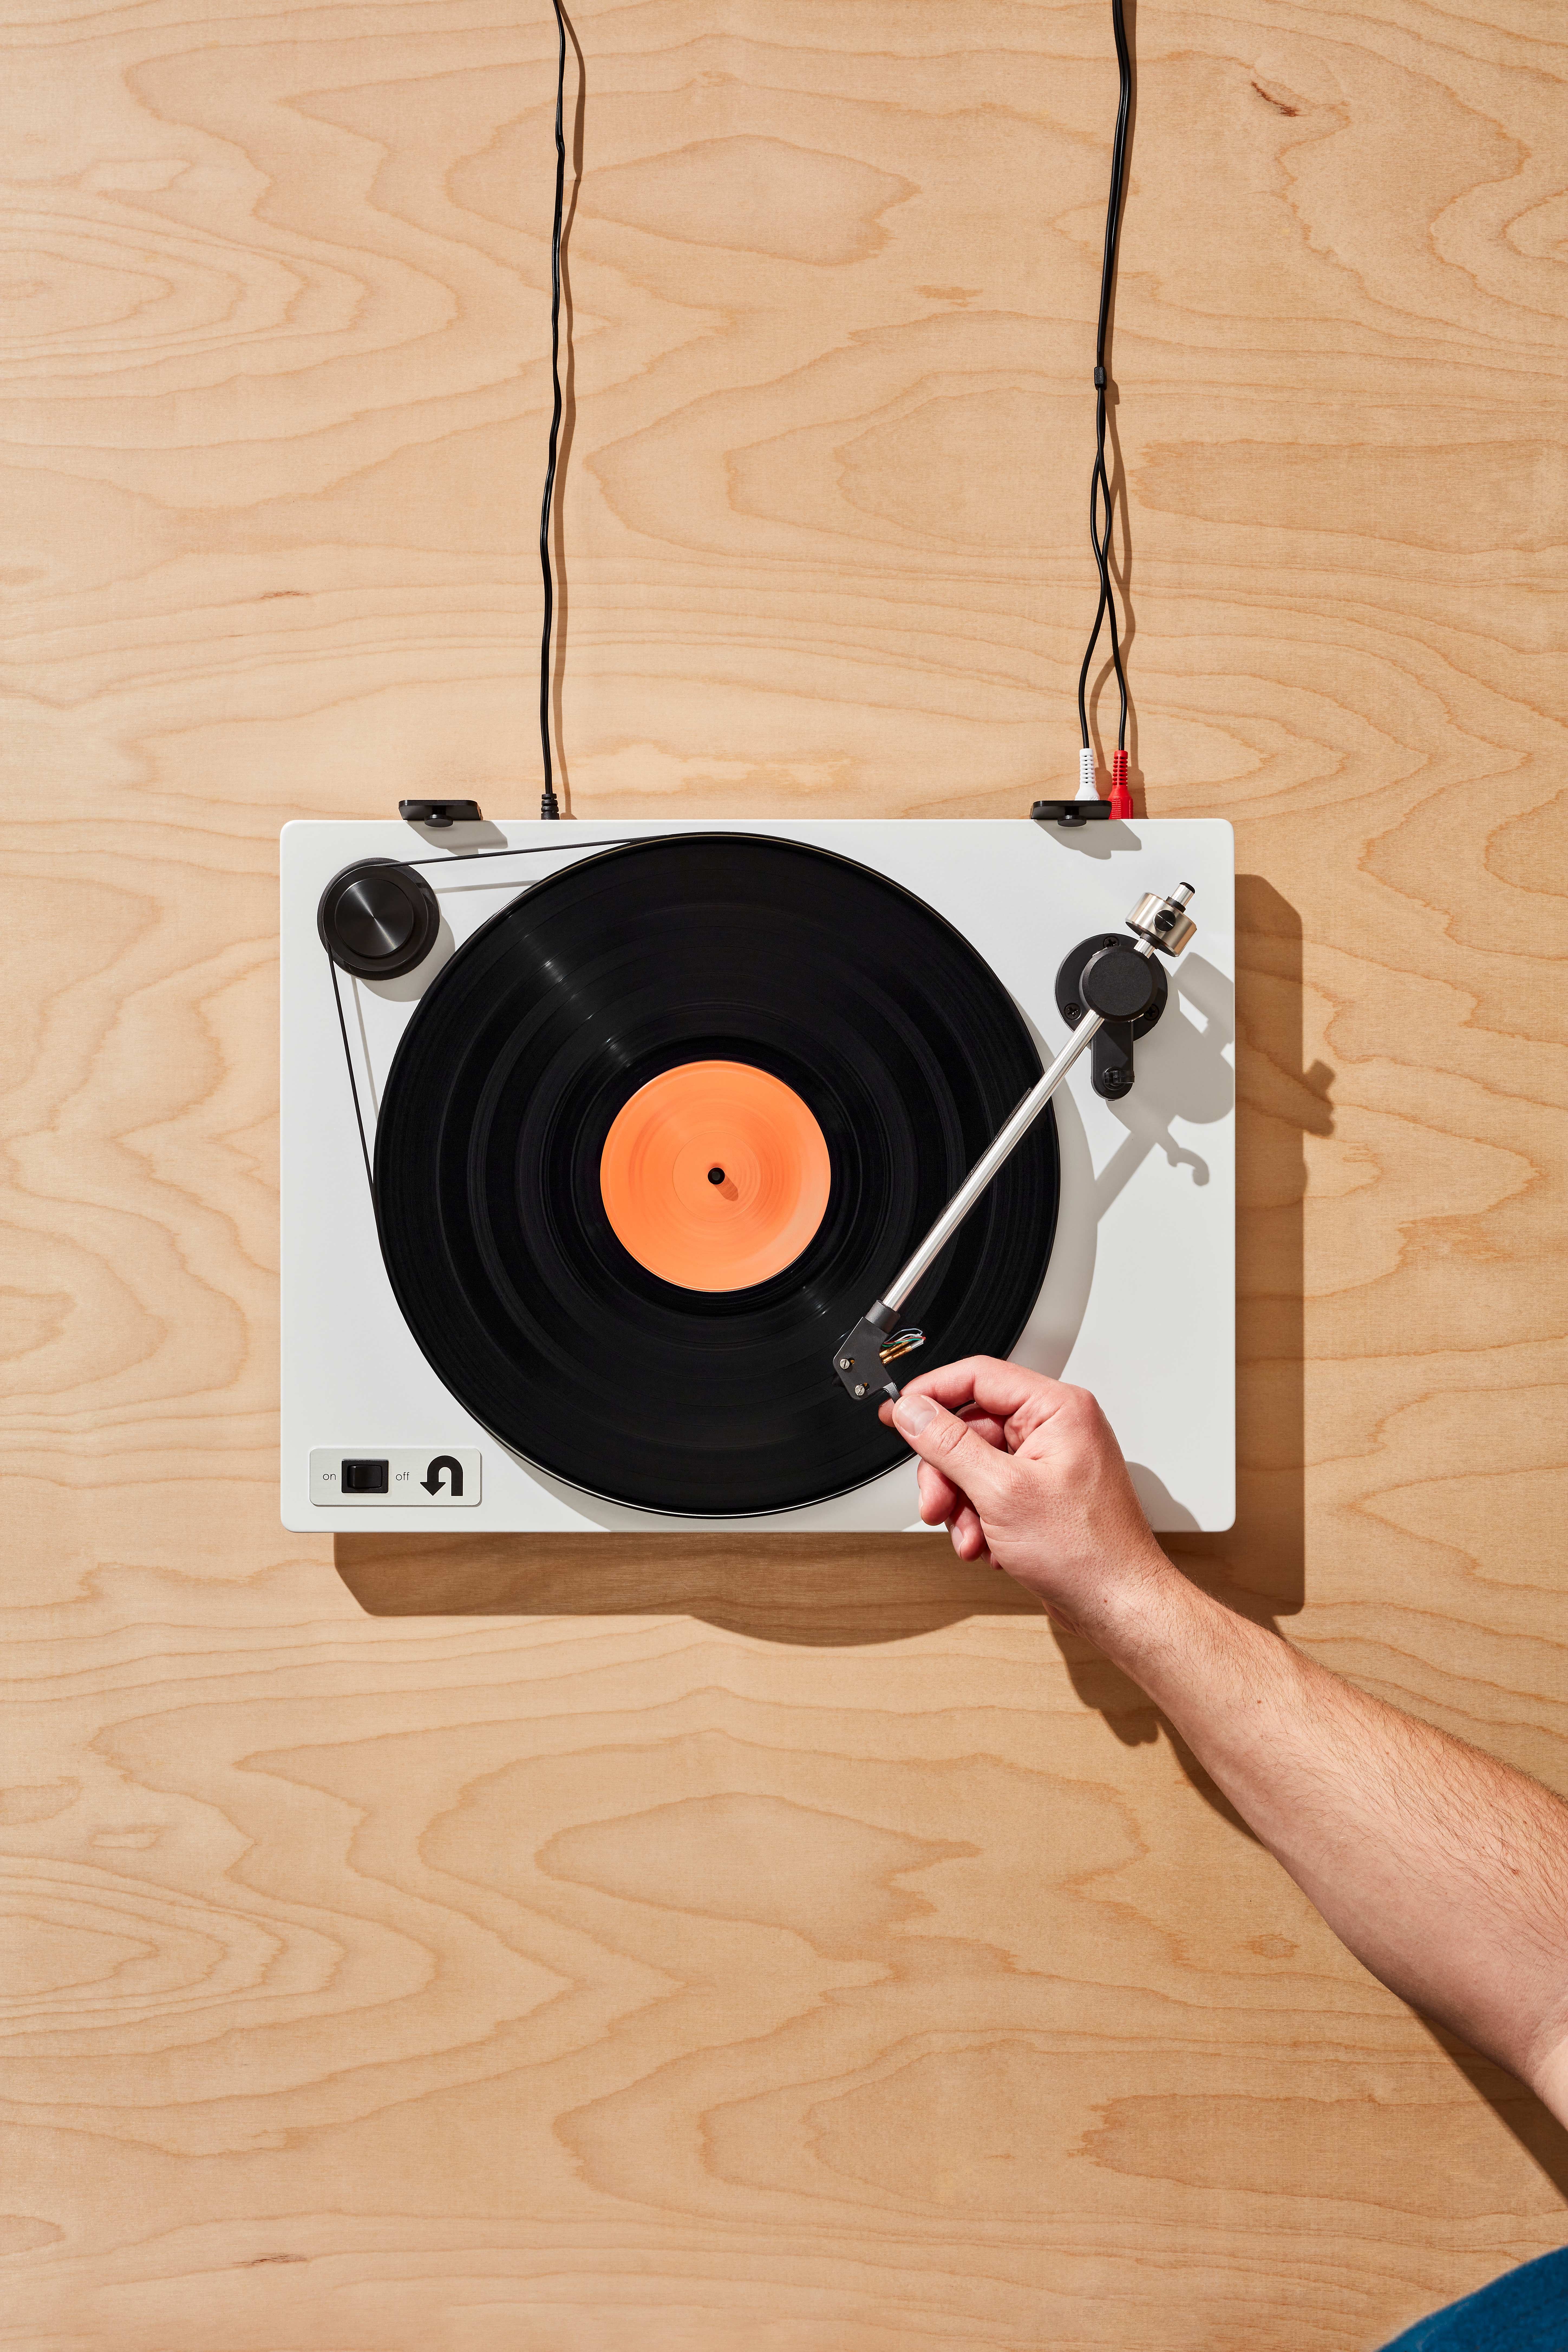 How much did vinyl music sales grow in 2021? Increased by 20 million